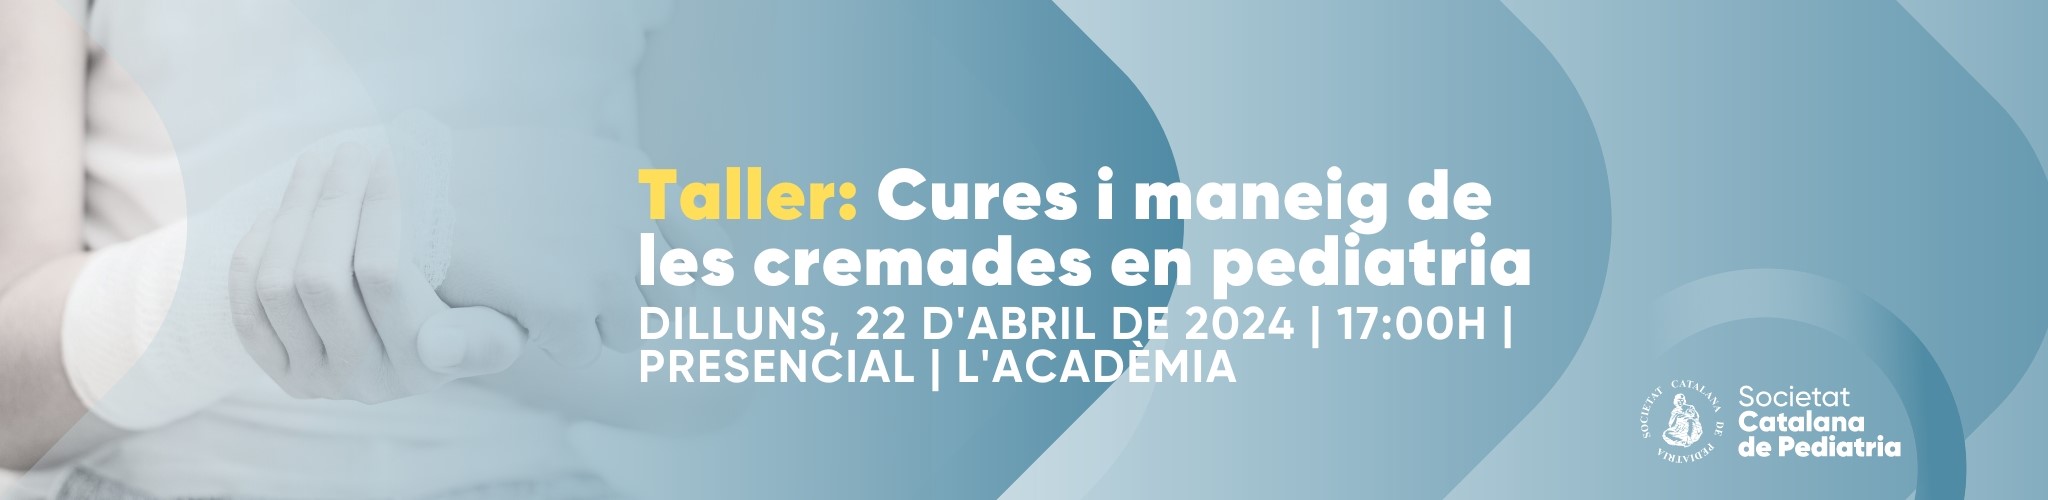 Taller cures i  cremades